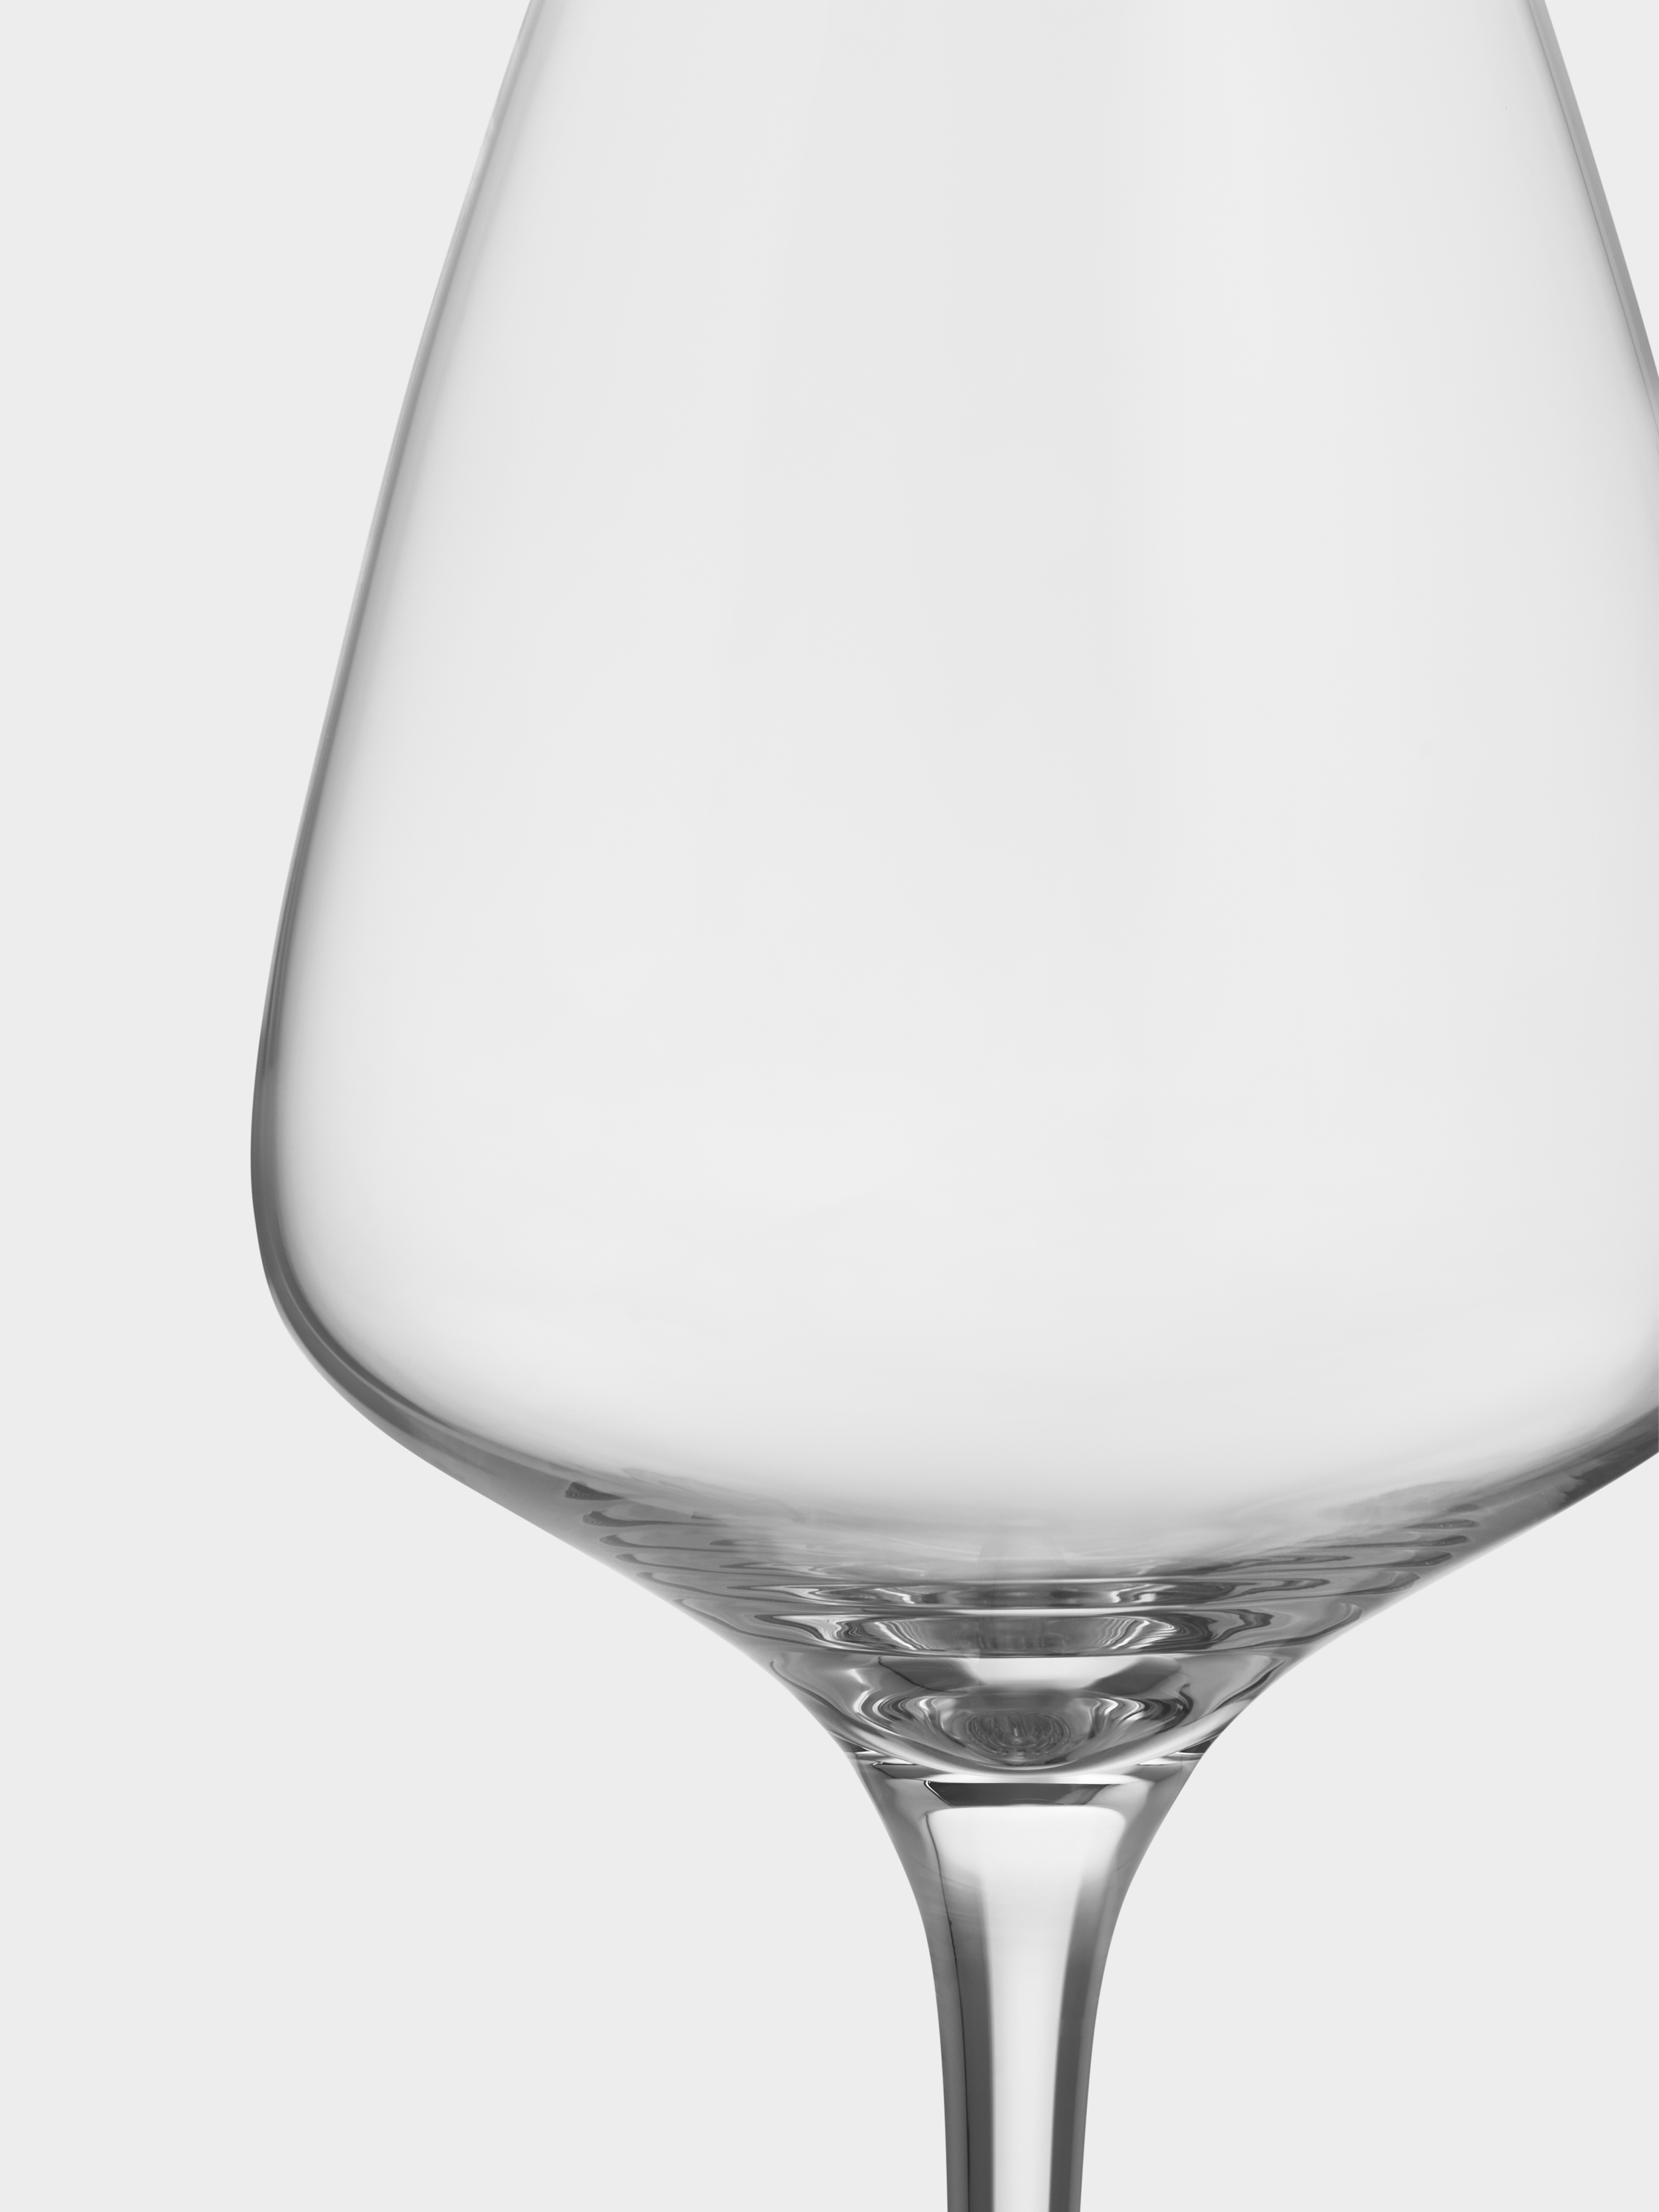 How To Pack Wine Glasses and Stemware